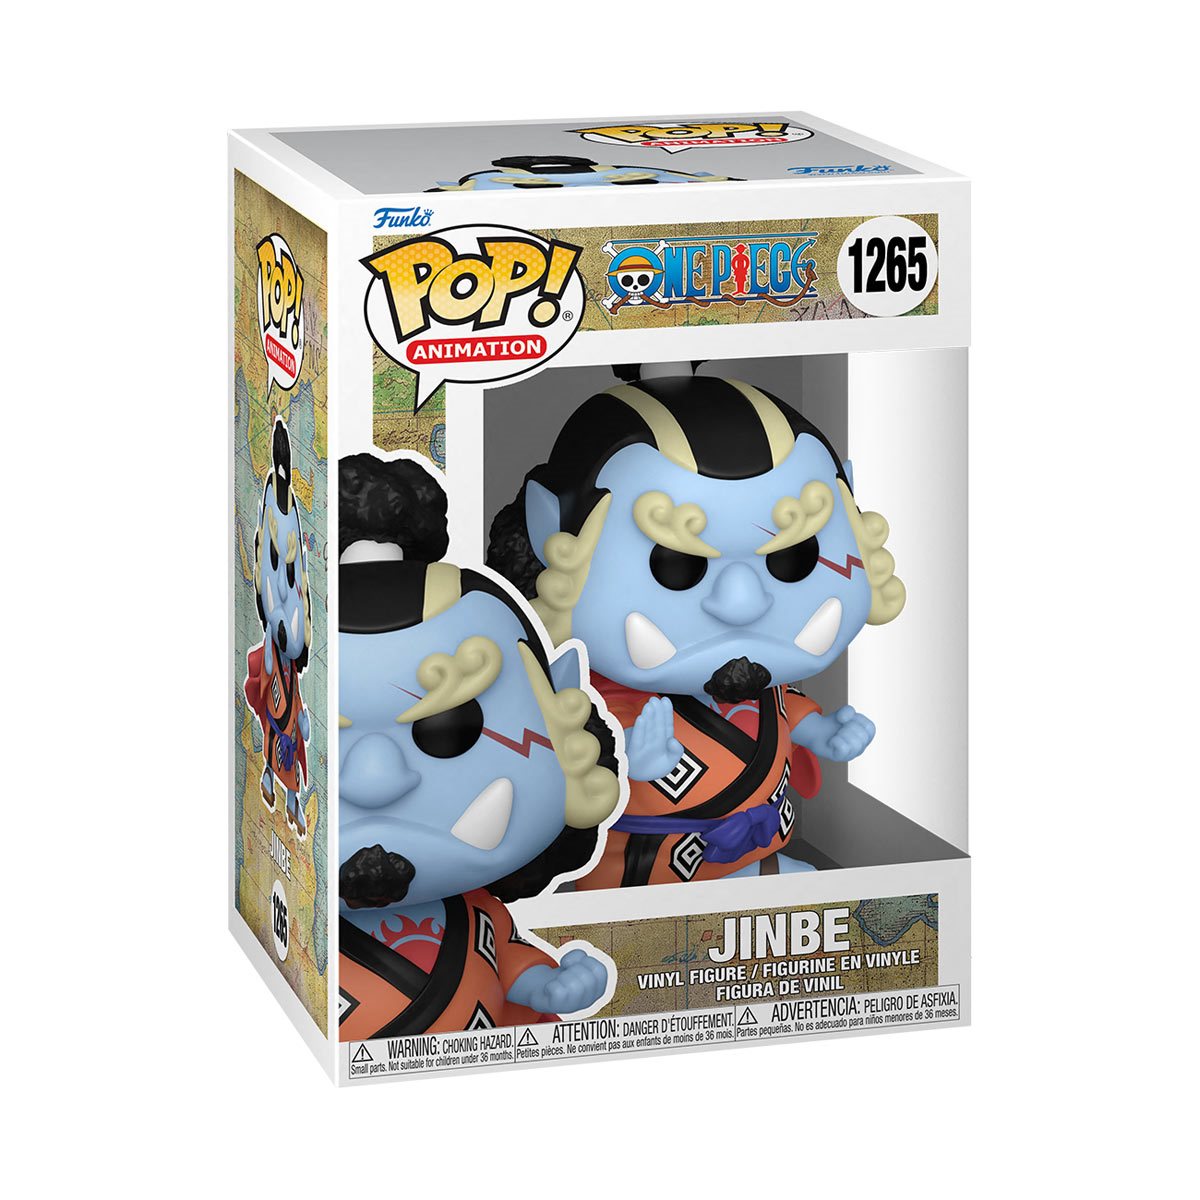 PREORDER Funko POP! Animation One Piece "Jinbe" Chance of Chase Vinyl Figure